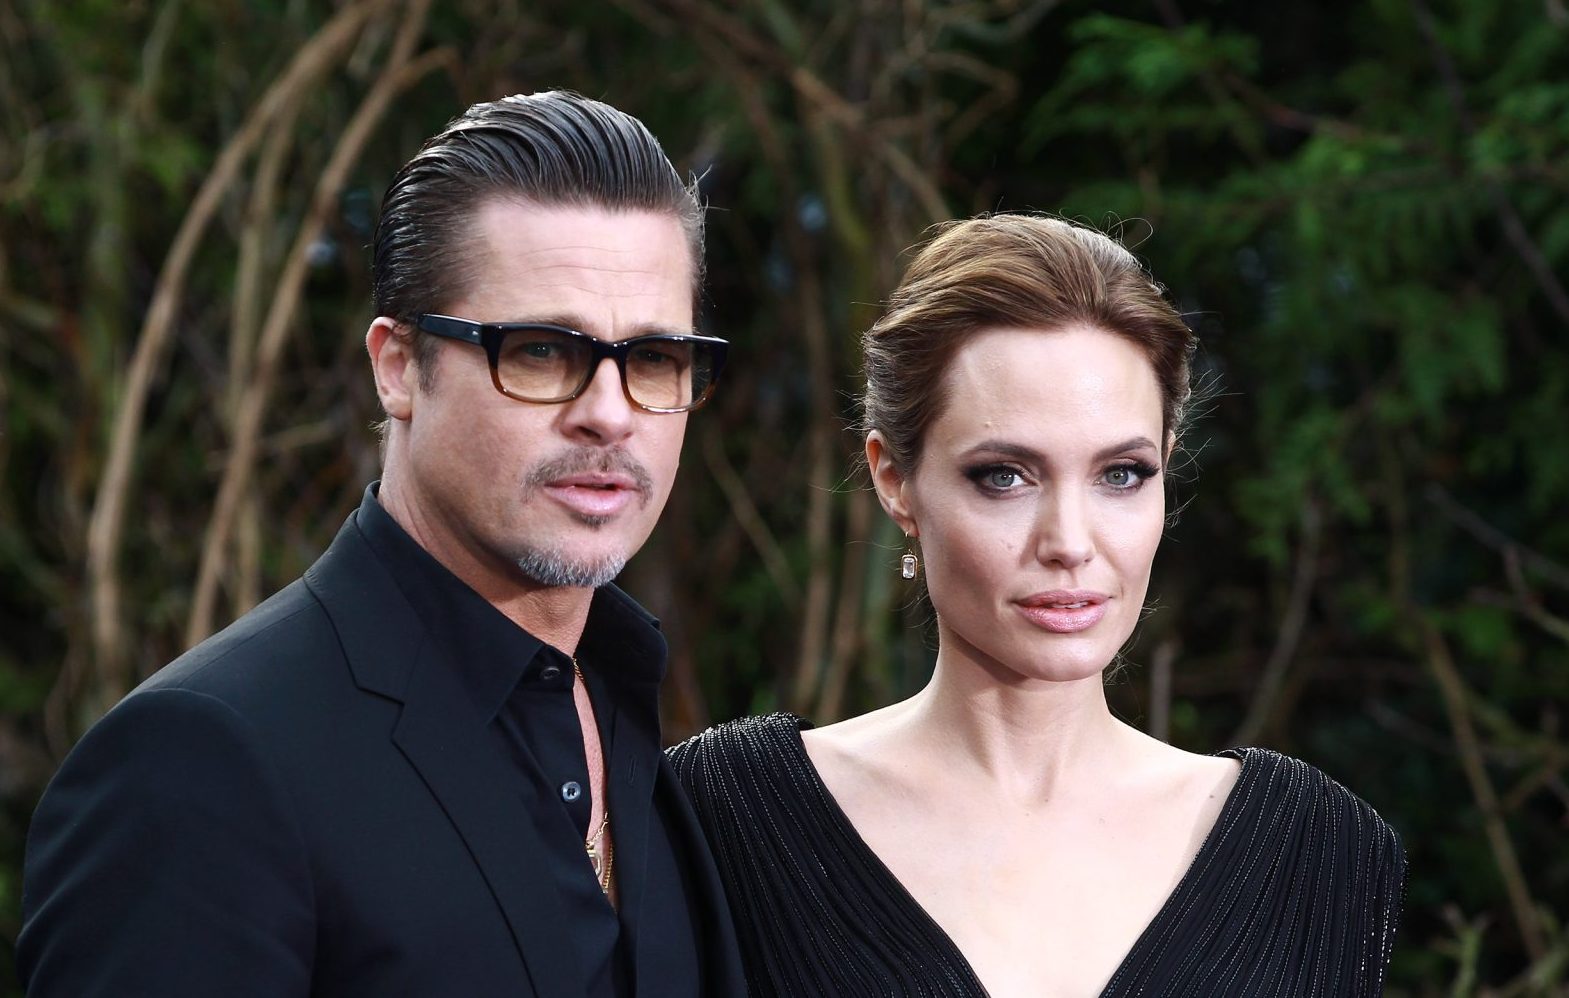 Angelina Jolie Claims Brad Pitt Choked Their Child, Threw Liquor & Abused Her In Private Plane Fight